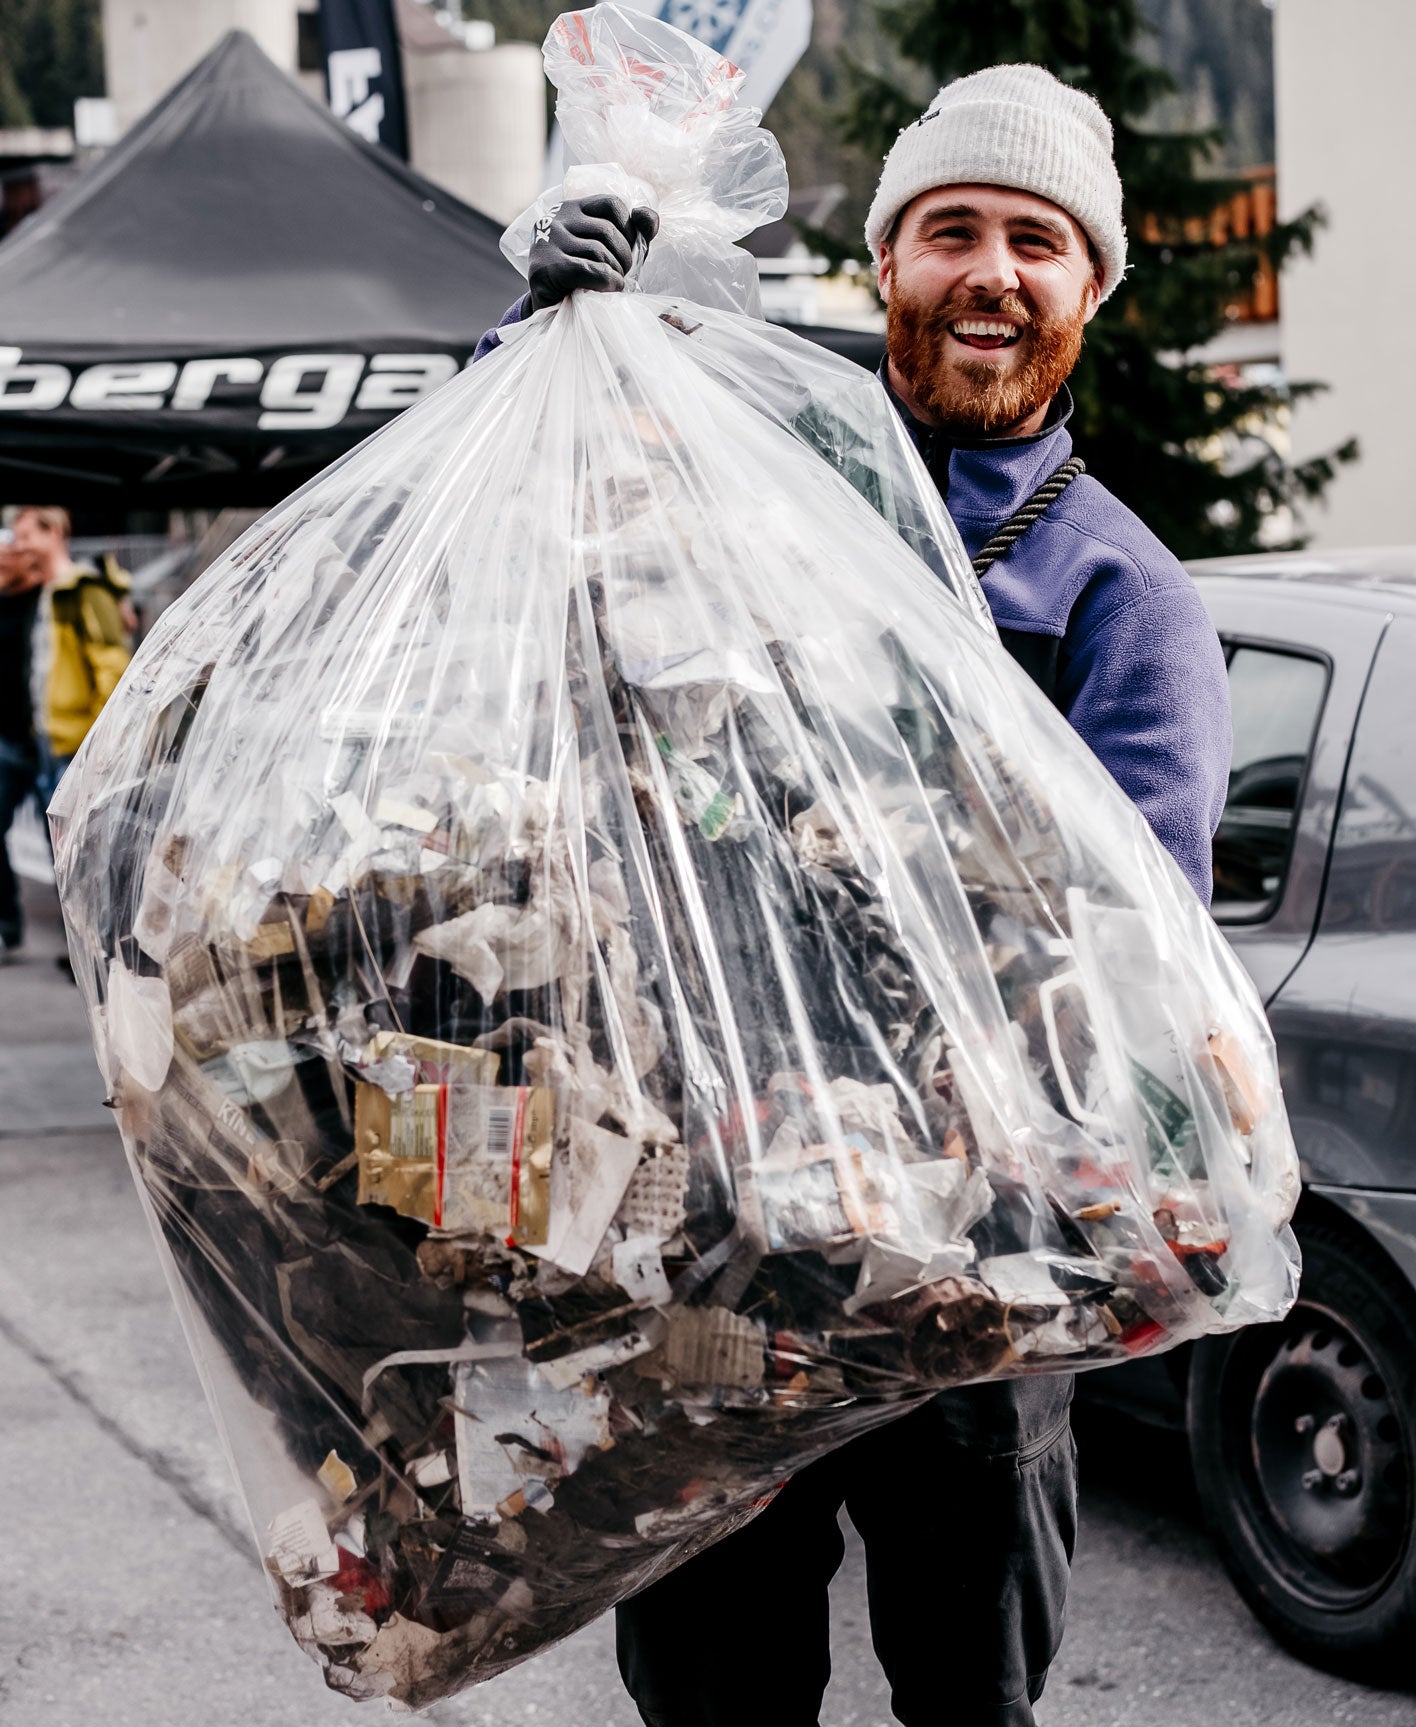 bearded man with white hat smiling holding big rubbish bag